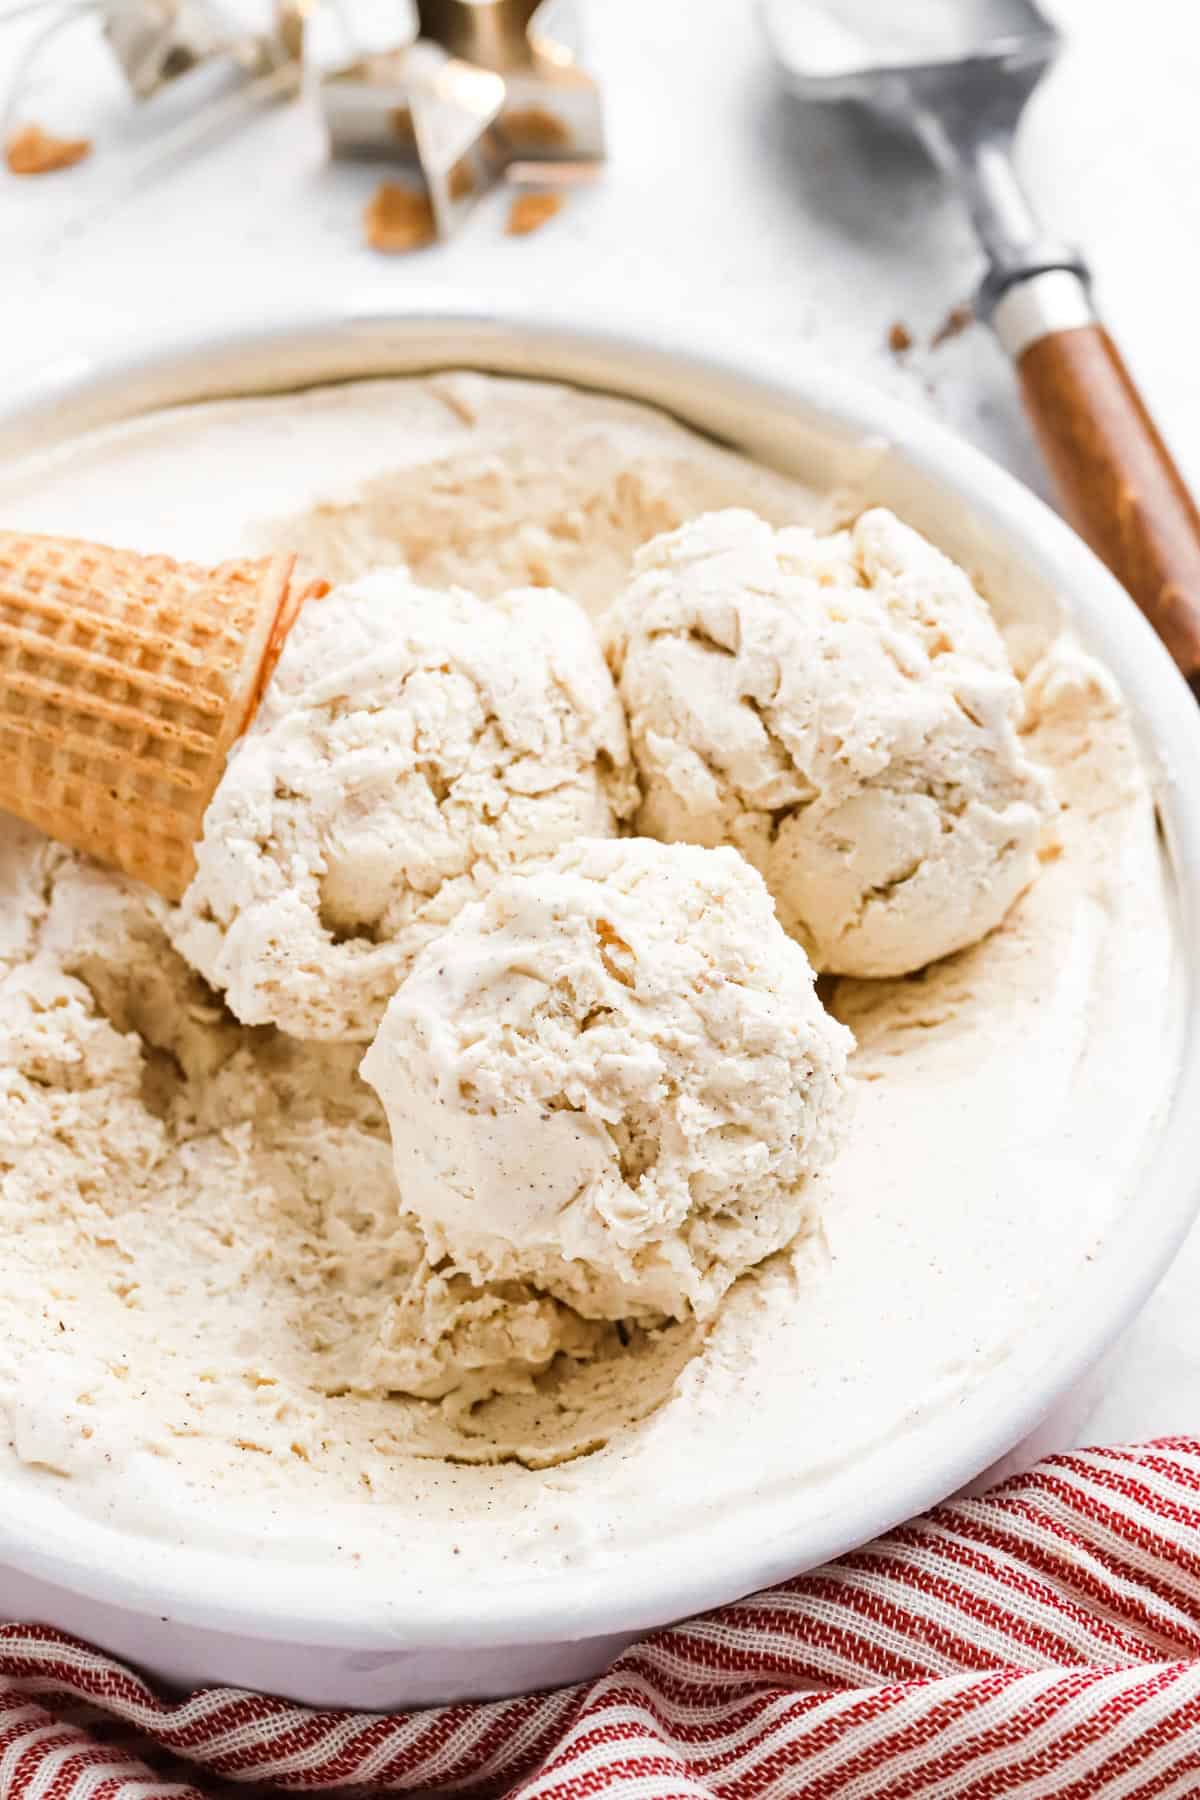 Three scoops of eggnog ice cream and a waffle cone on the pan